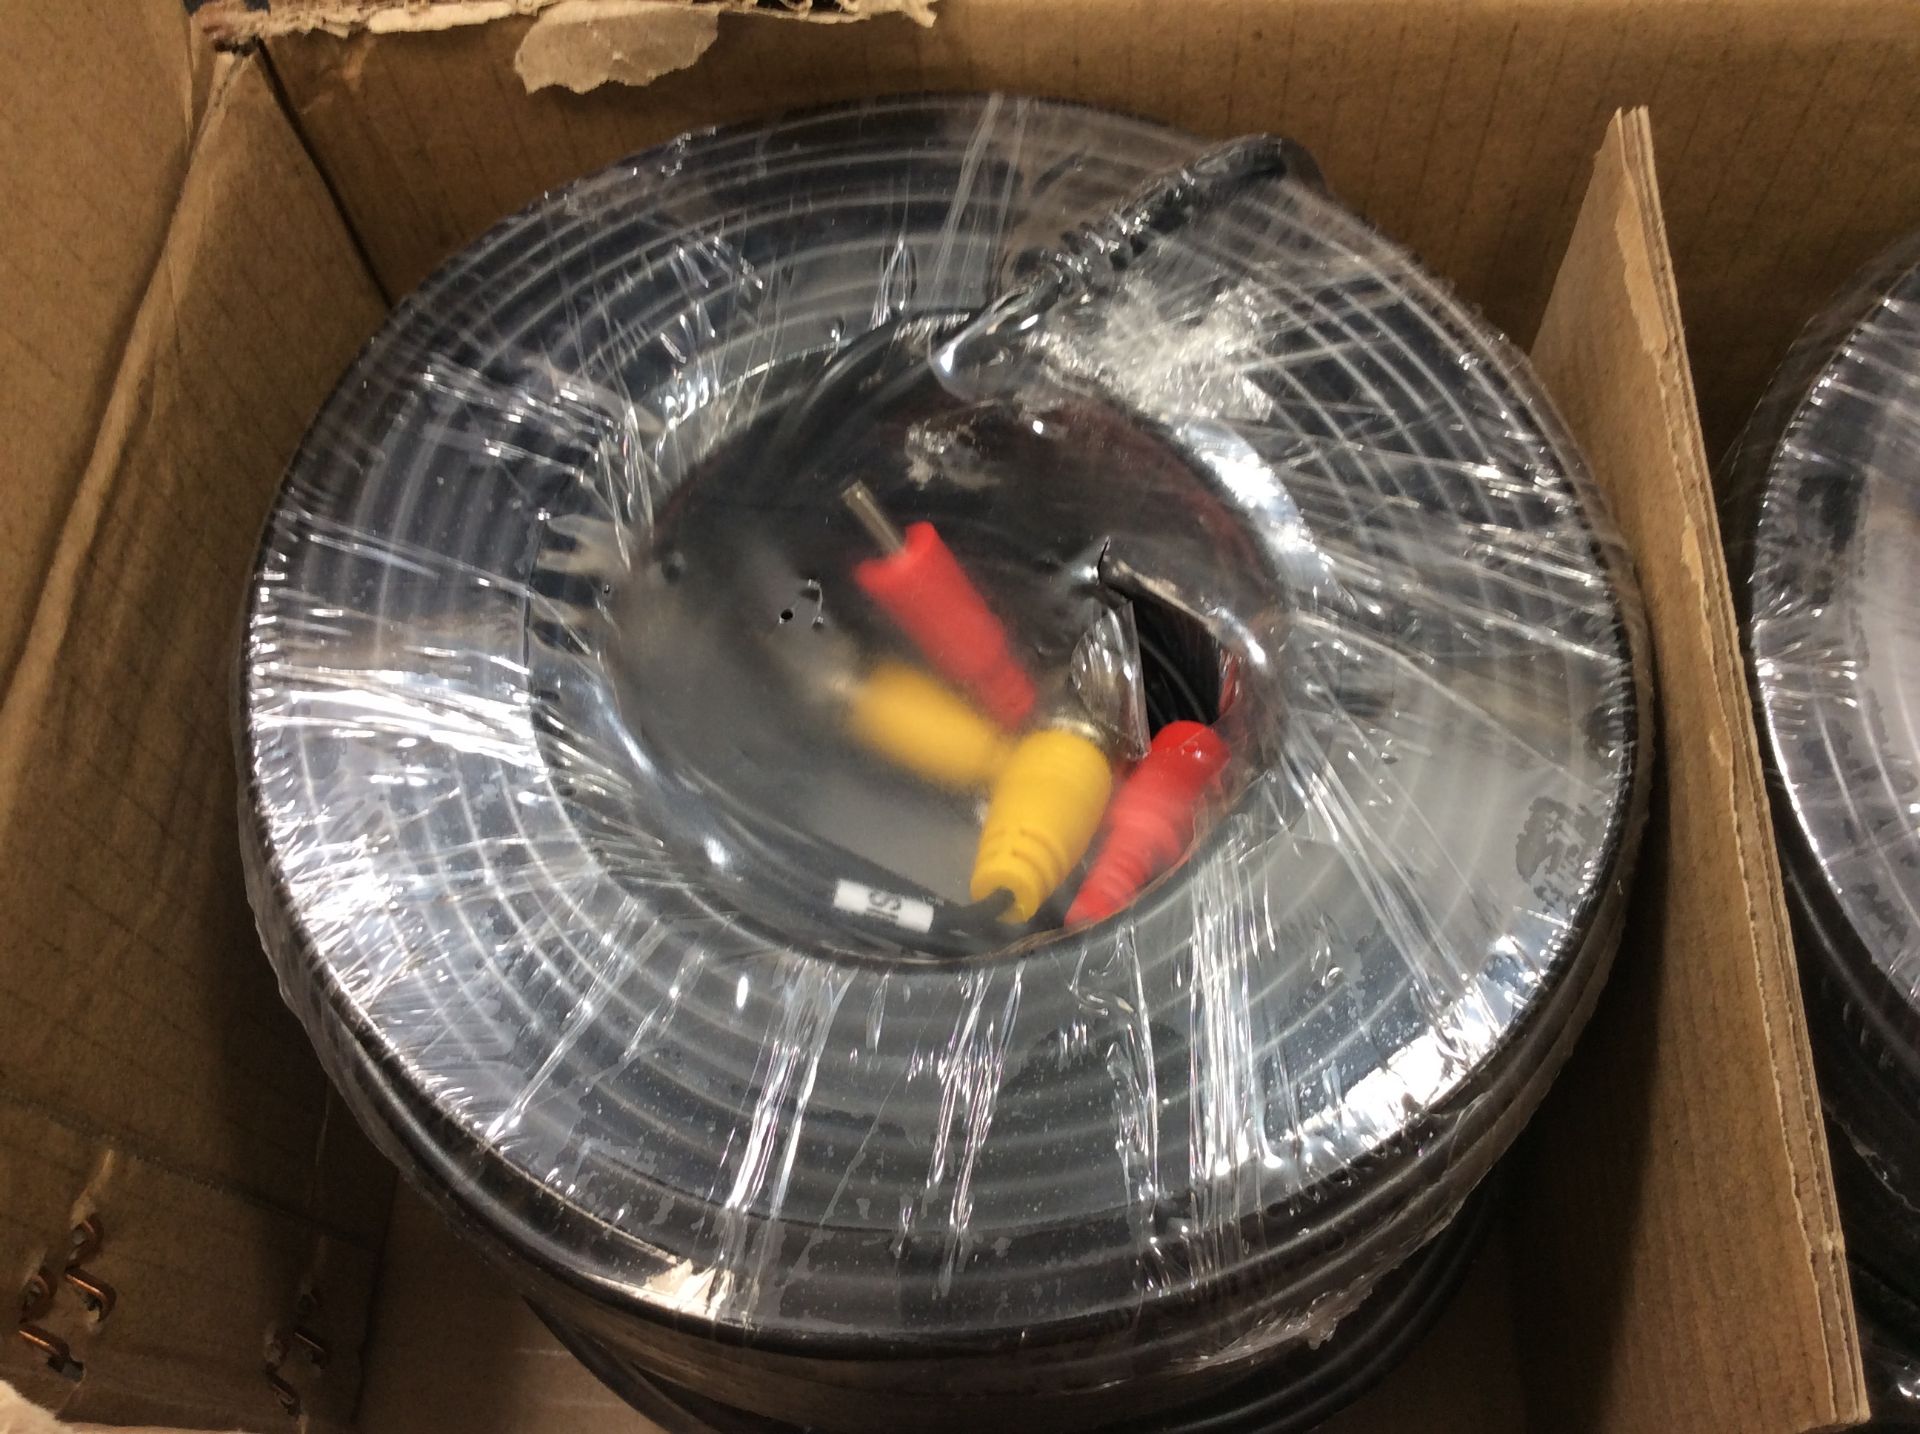 4 rolls of annke cctv cable - Image 2 of 2